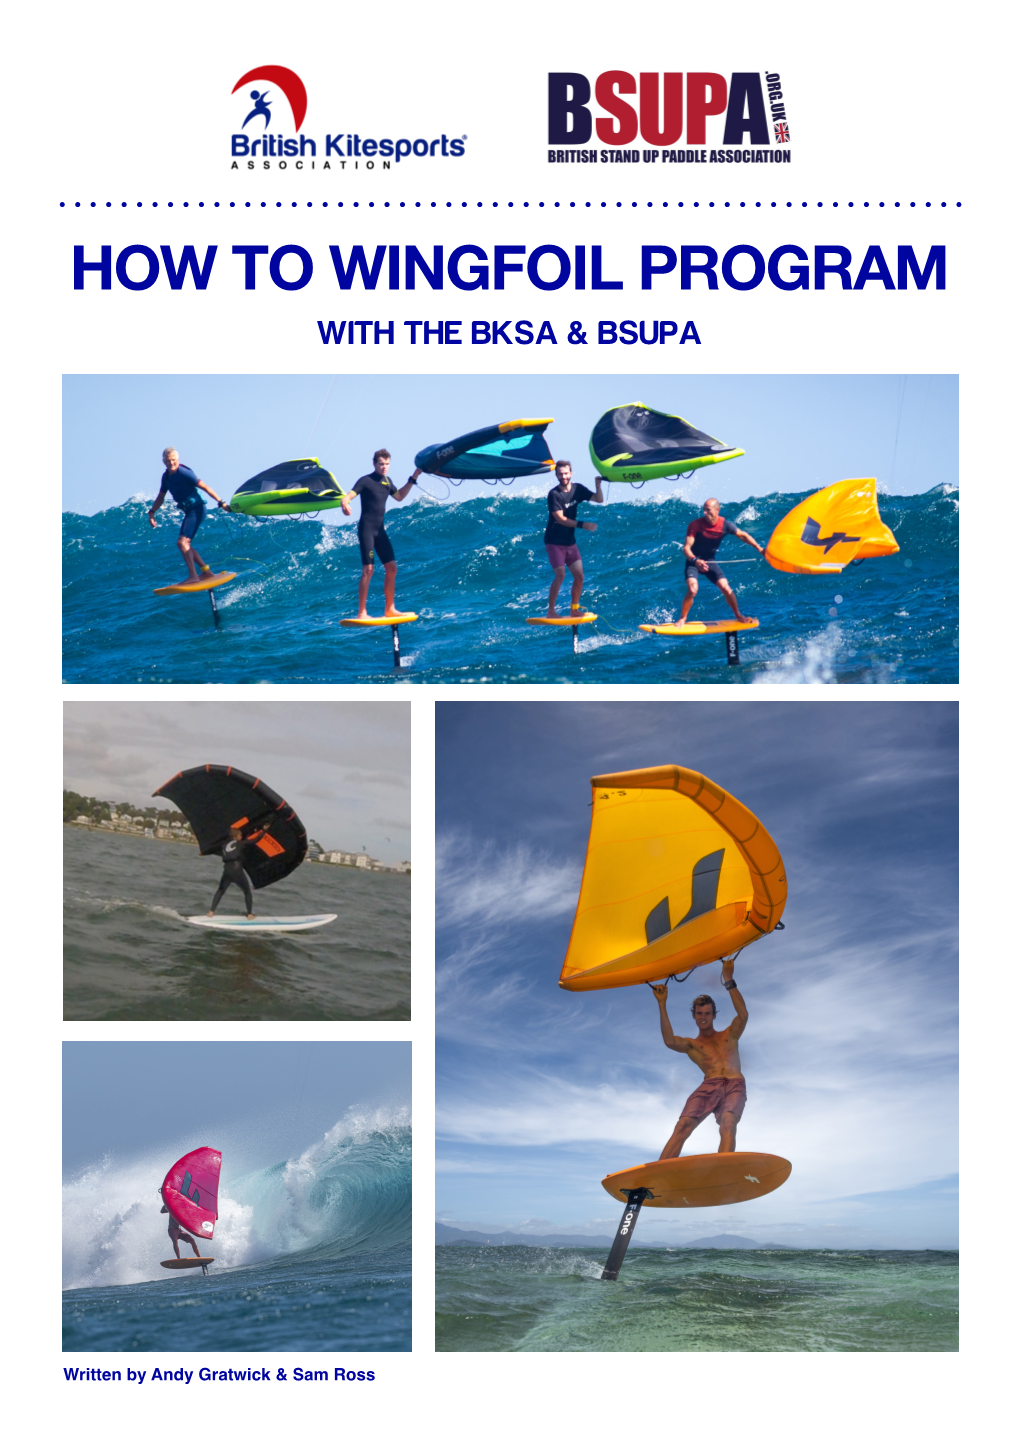 How to Wingfoil Program with the Bksa & Bsupa